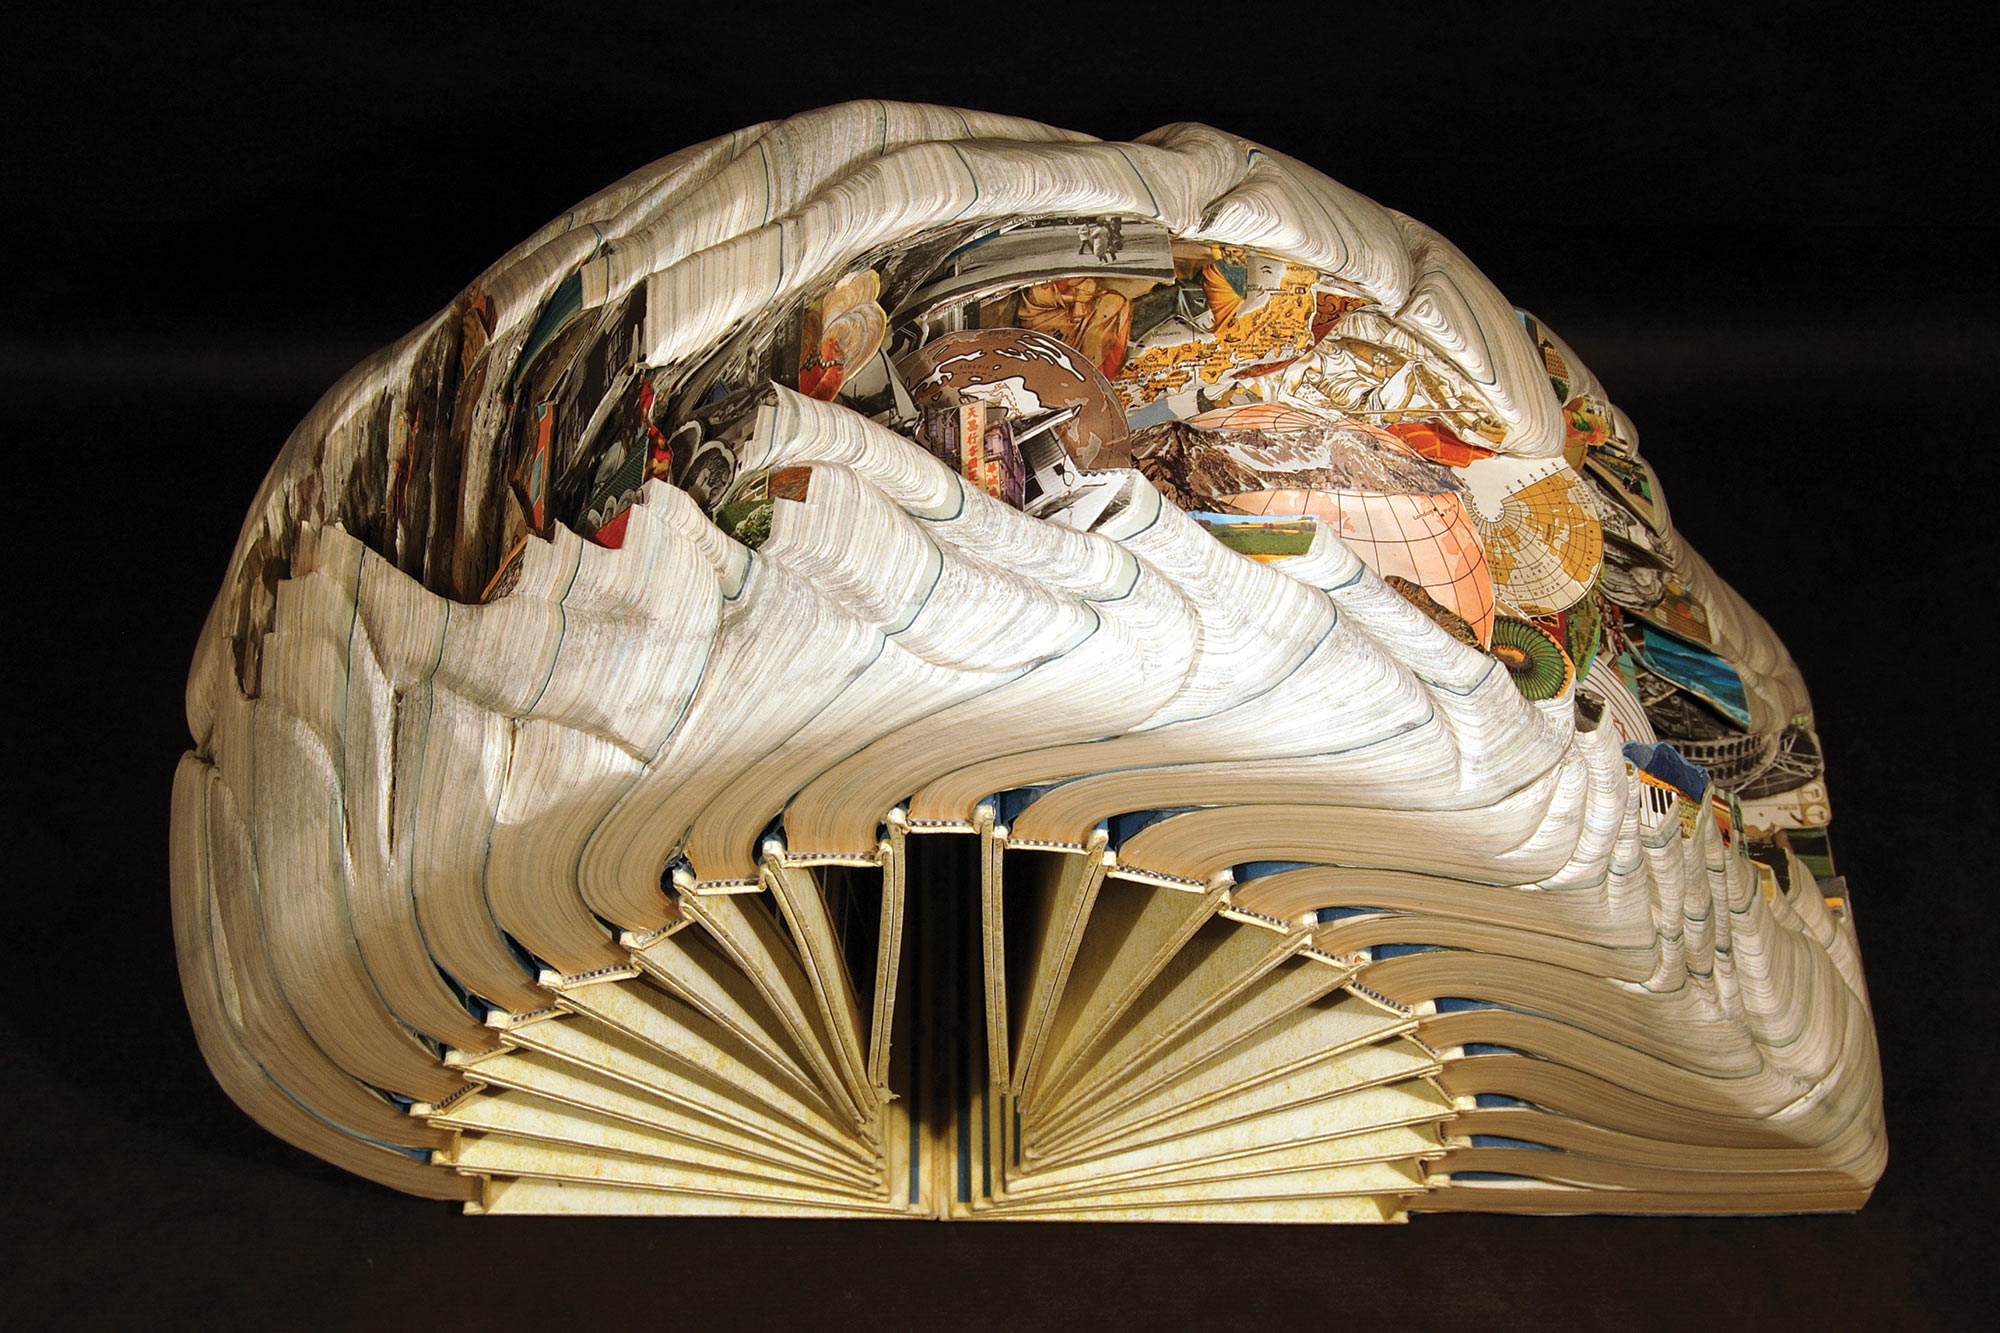 Gallery: New art carved from old books